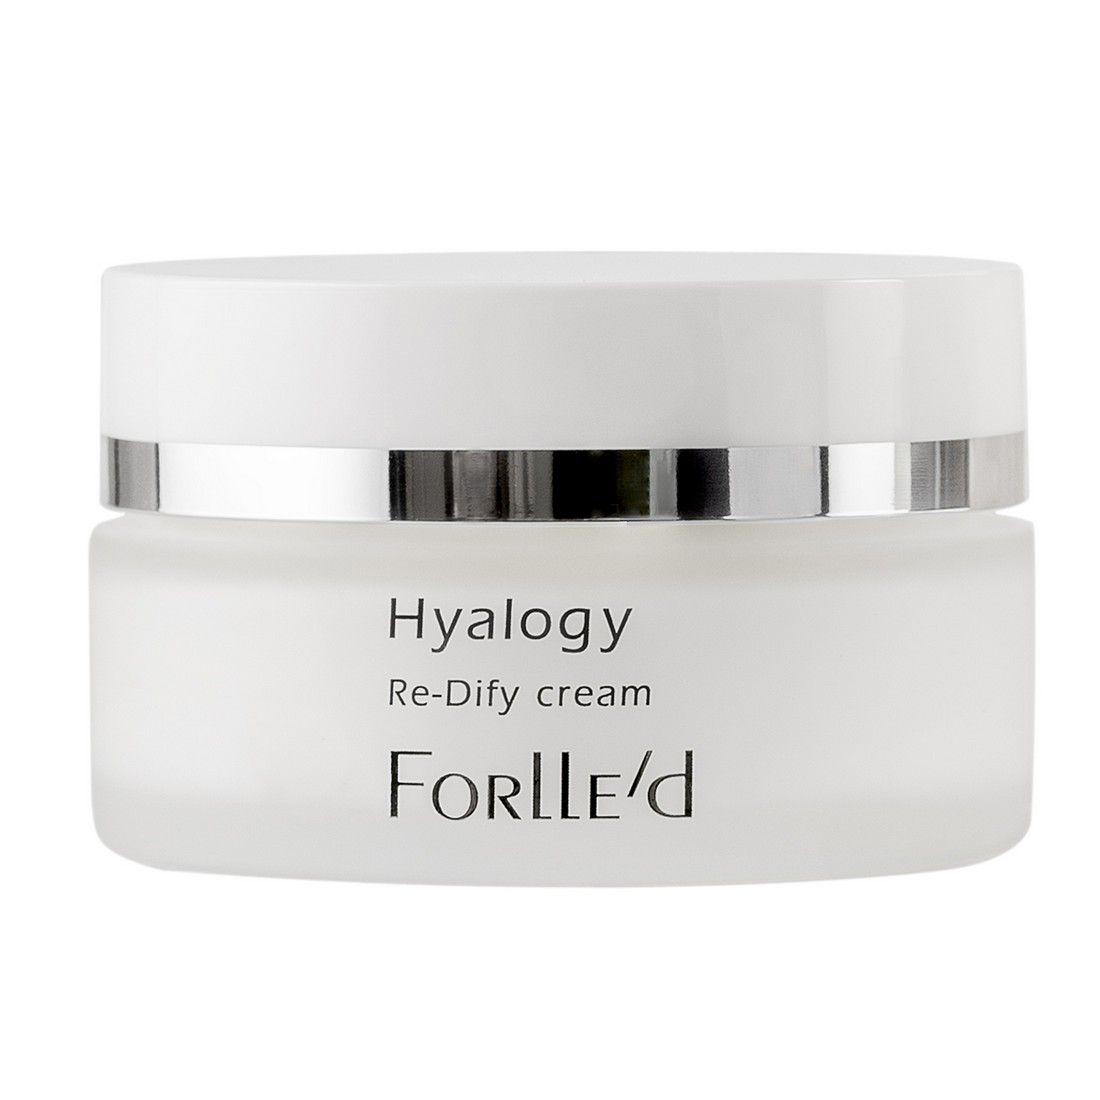 Hyalogy Re-Dify cream DOM